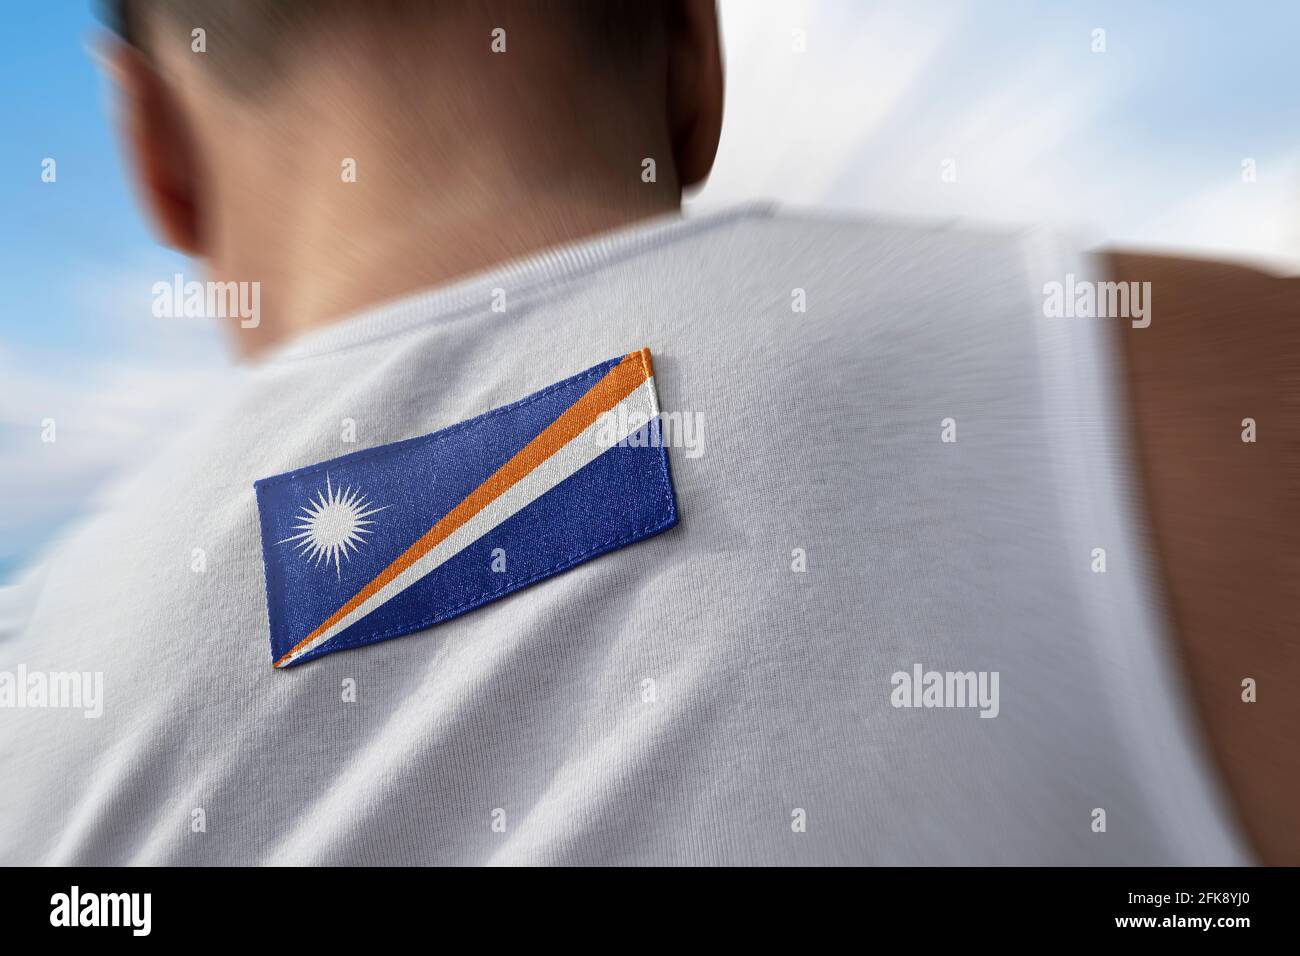 The national flag of Marshall Islands on the athlete's back Stock Photo